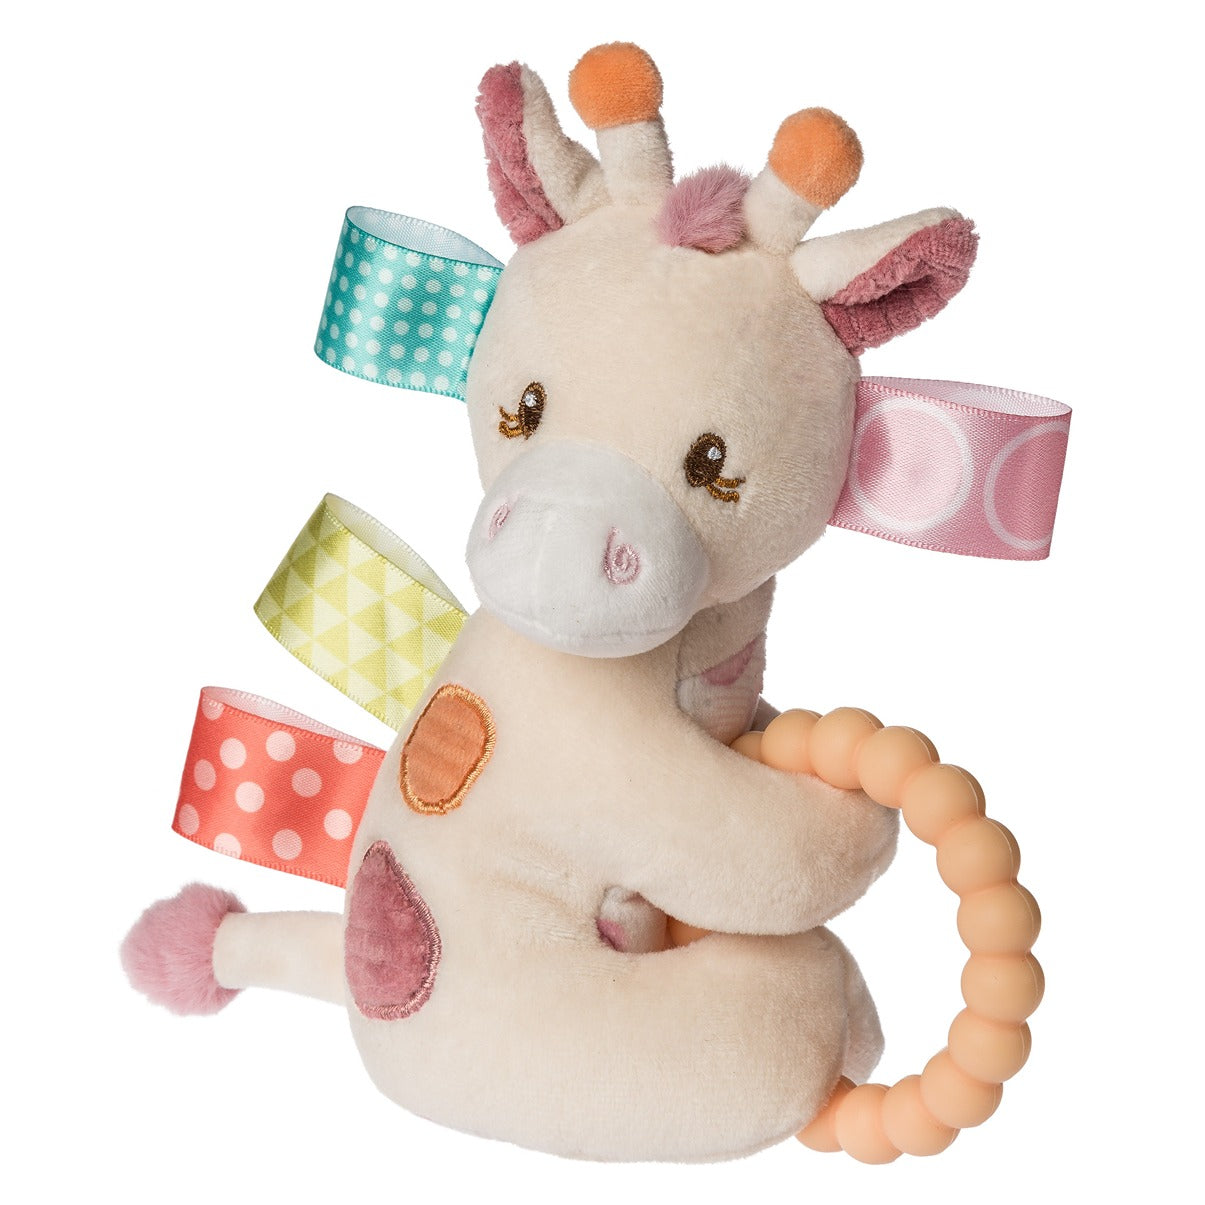 With a simple shake and rattle, our Tilly Giraffe teether rattle helps your baby explore his world.